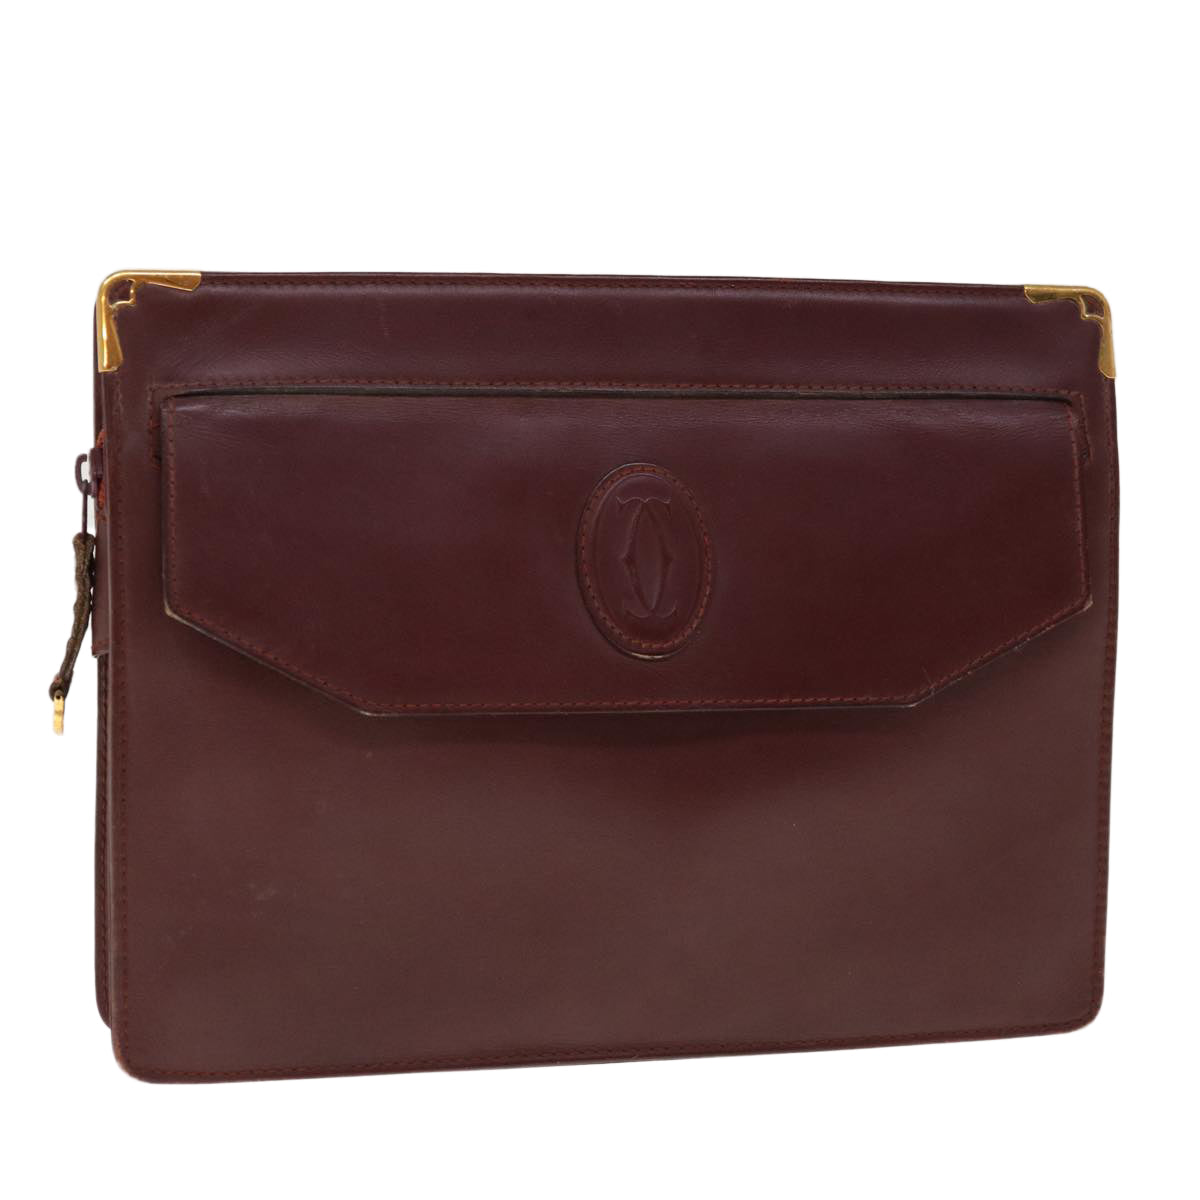 CARTIER Clutch Bag Leather Wine Red Auth 63905